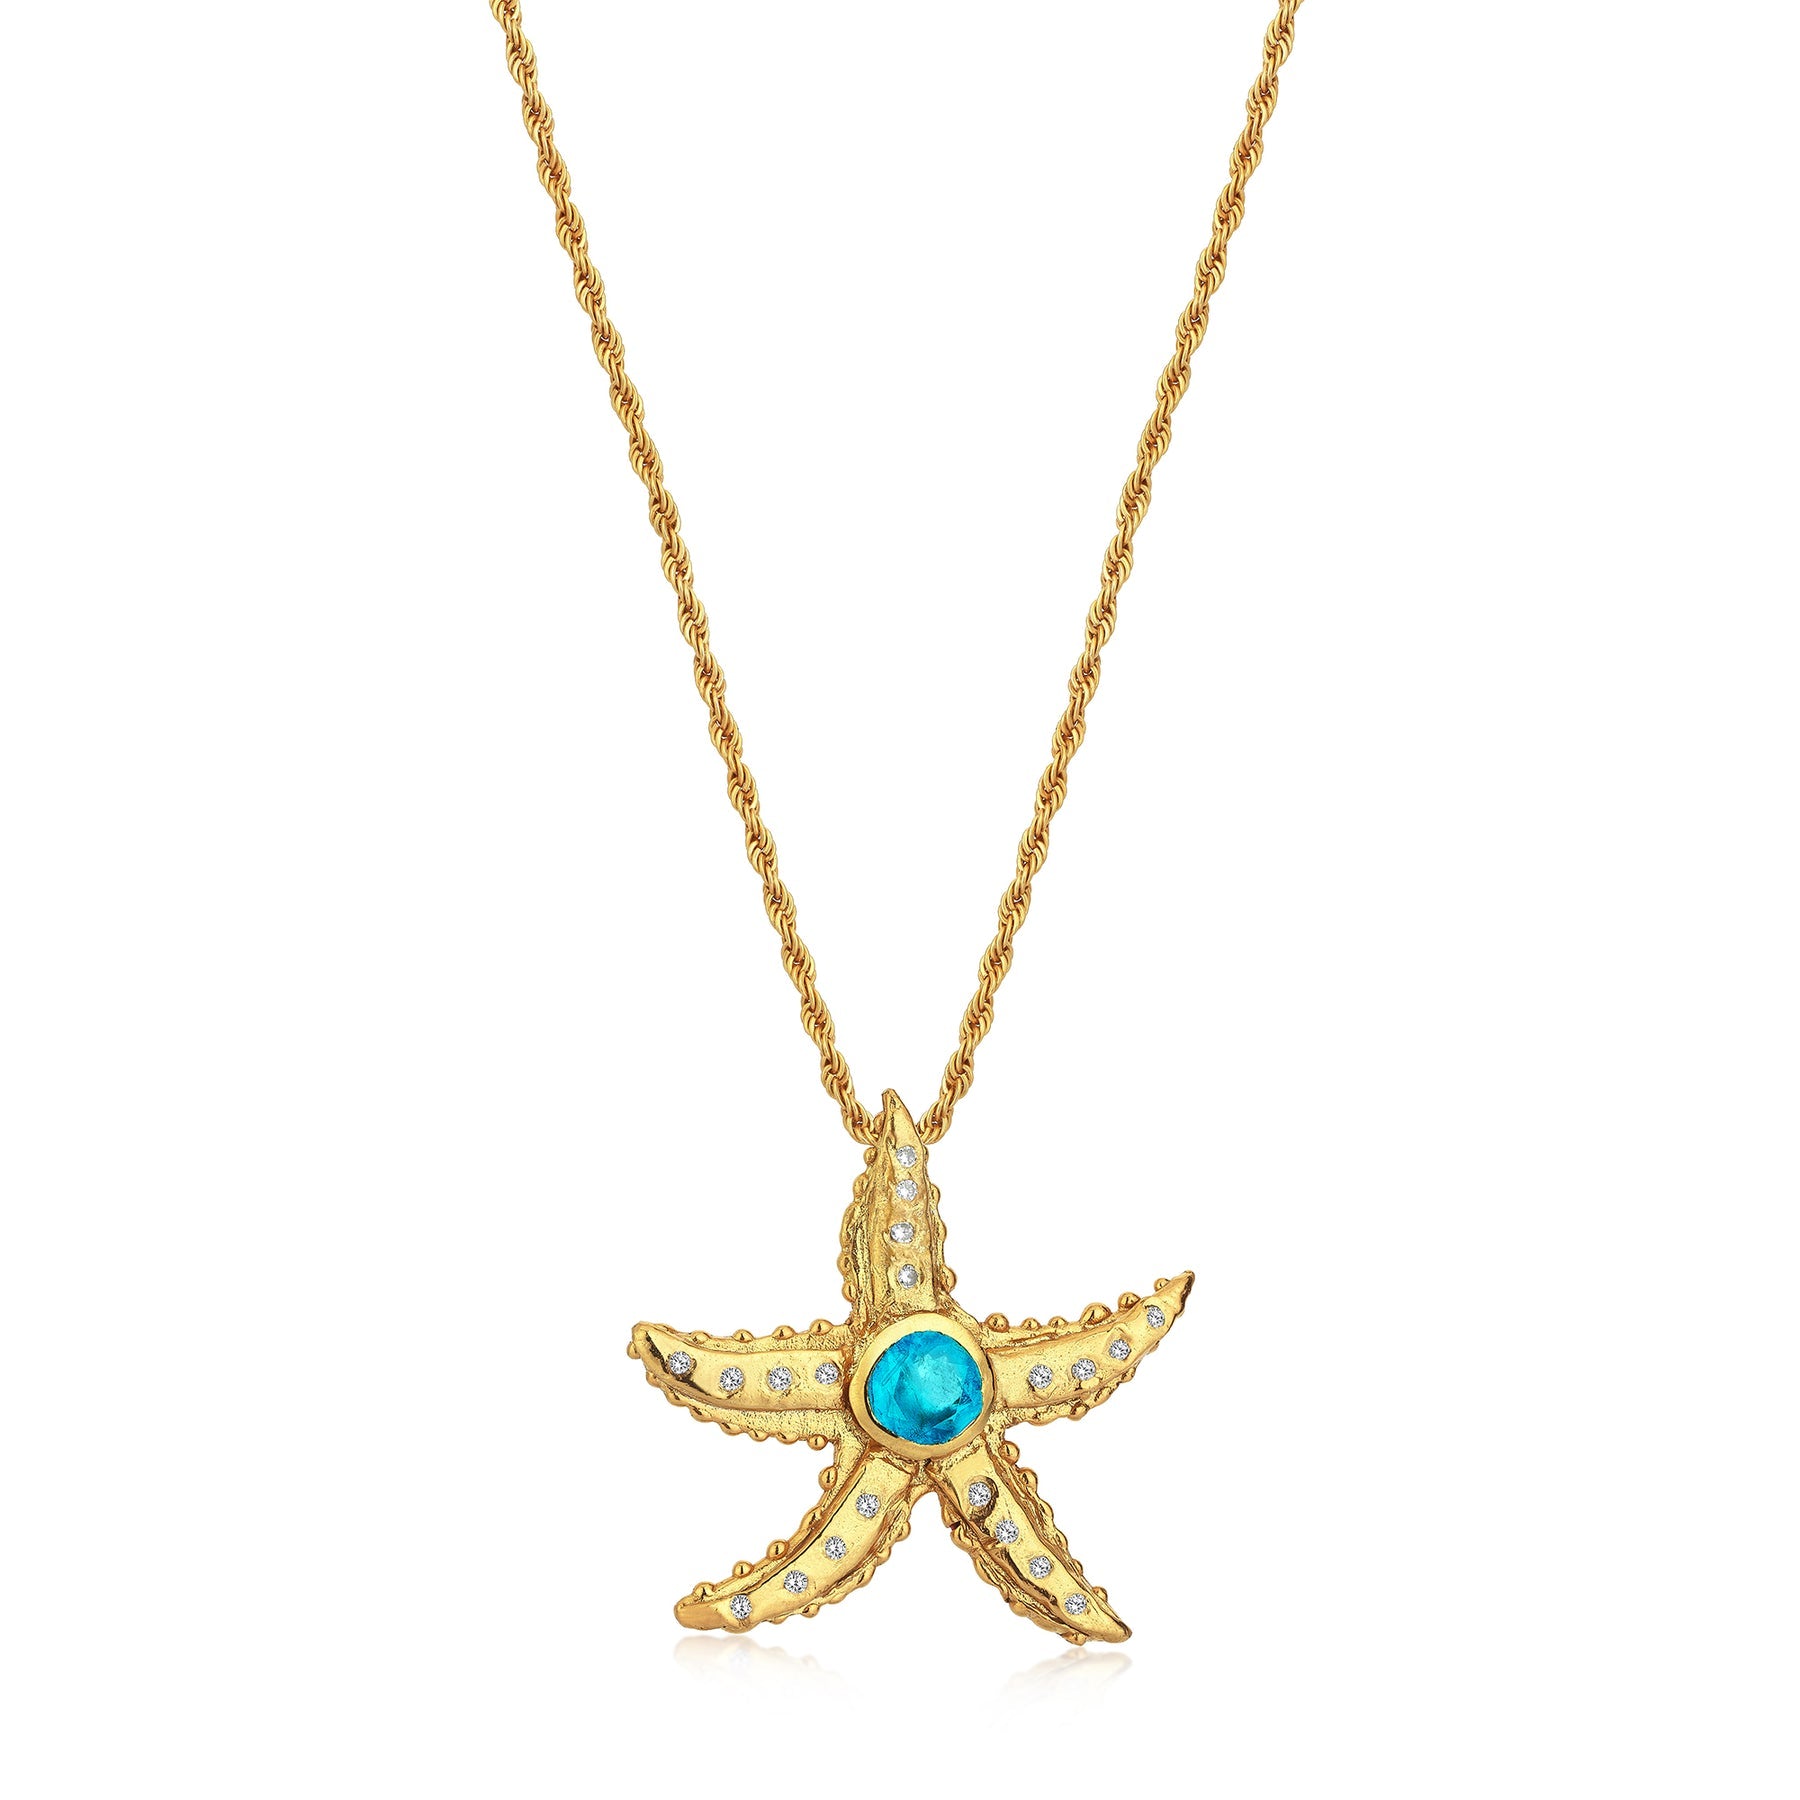 The Sea Star Necklace